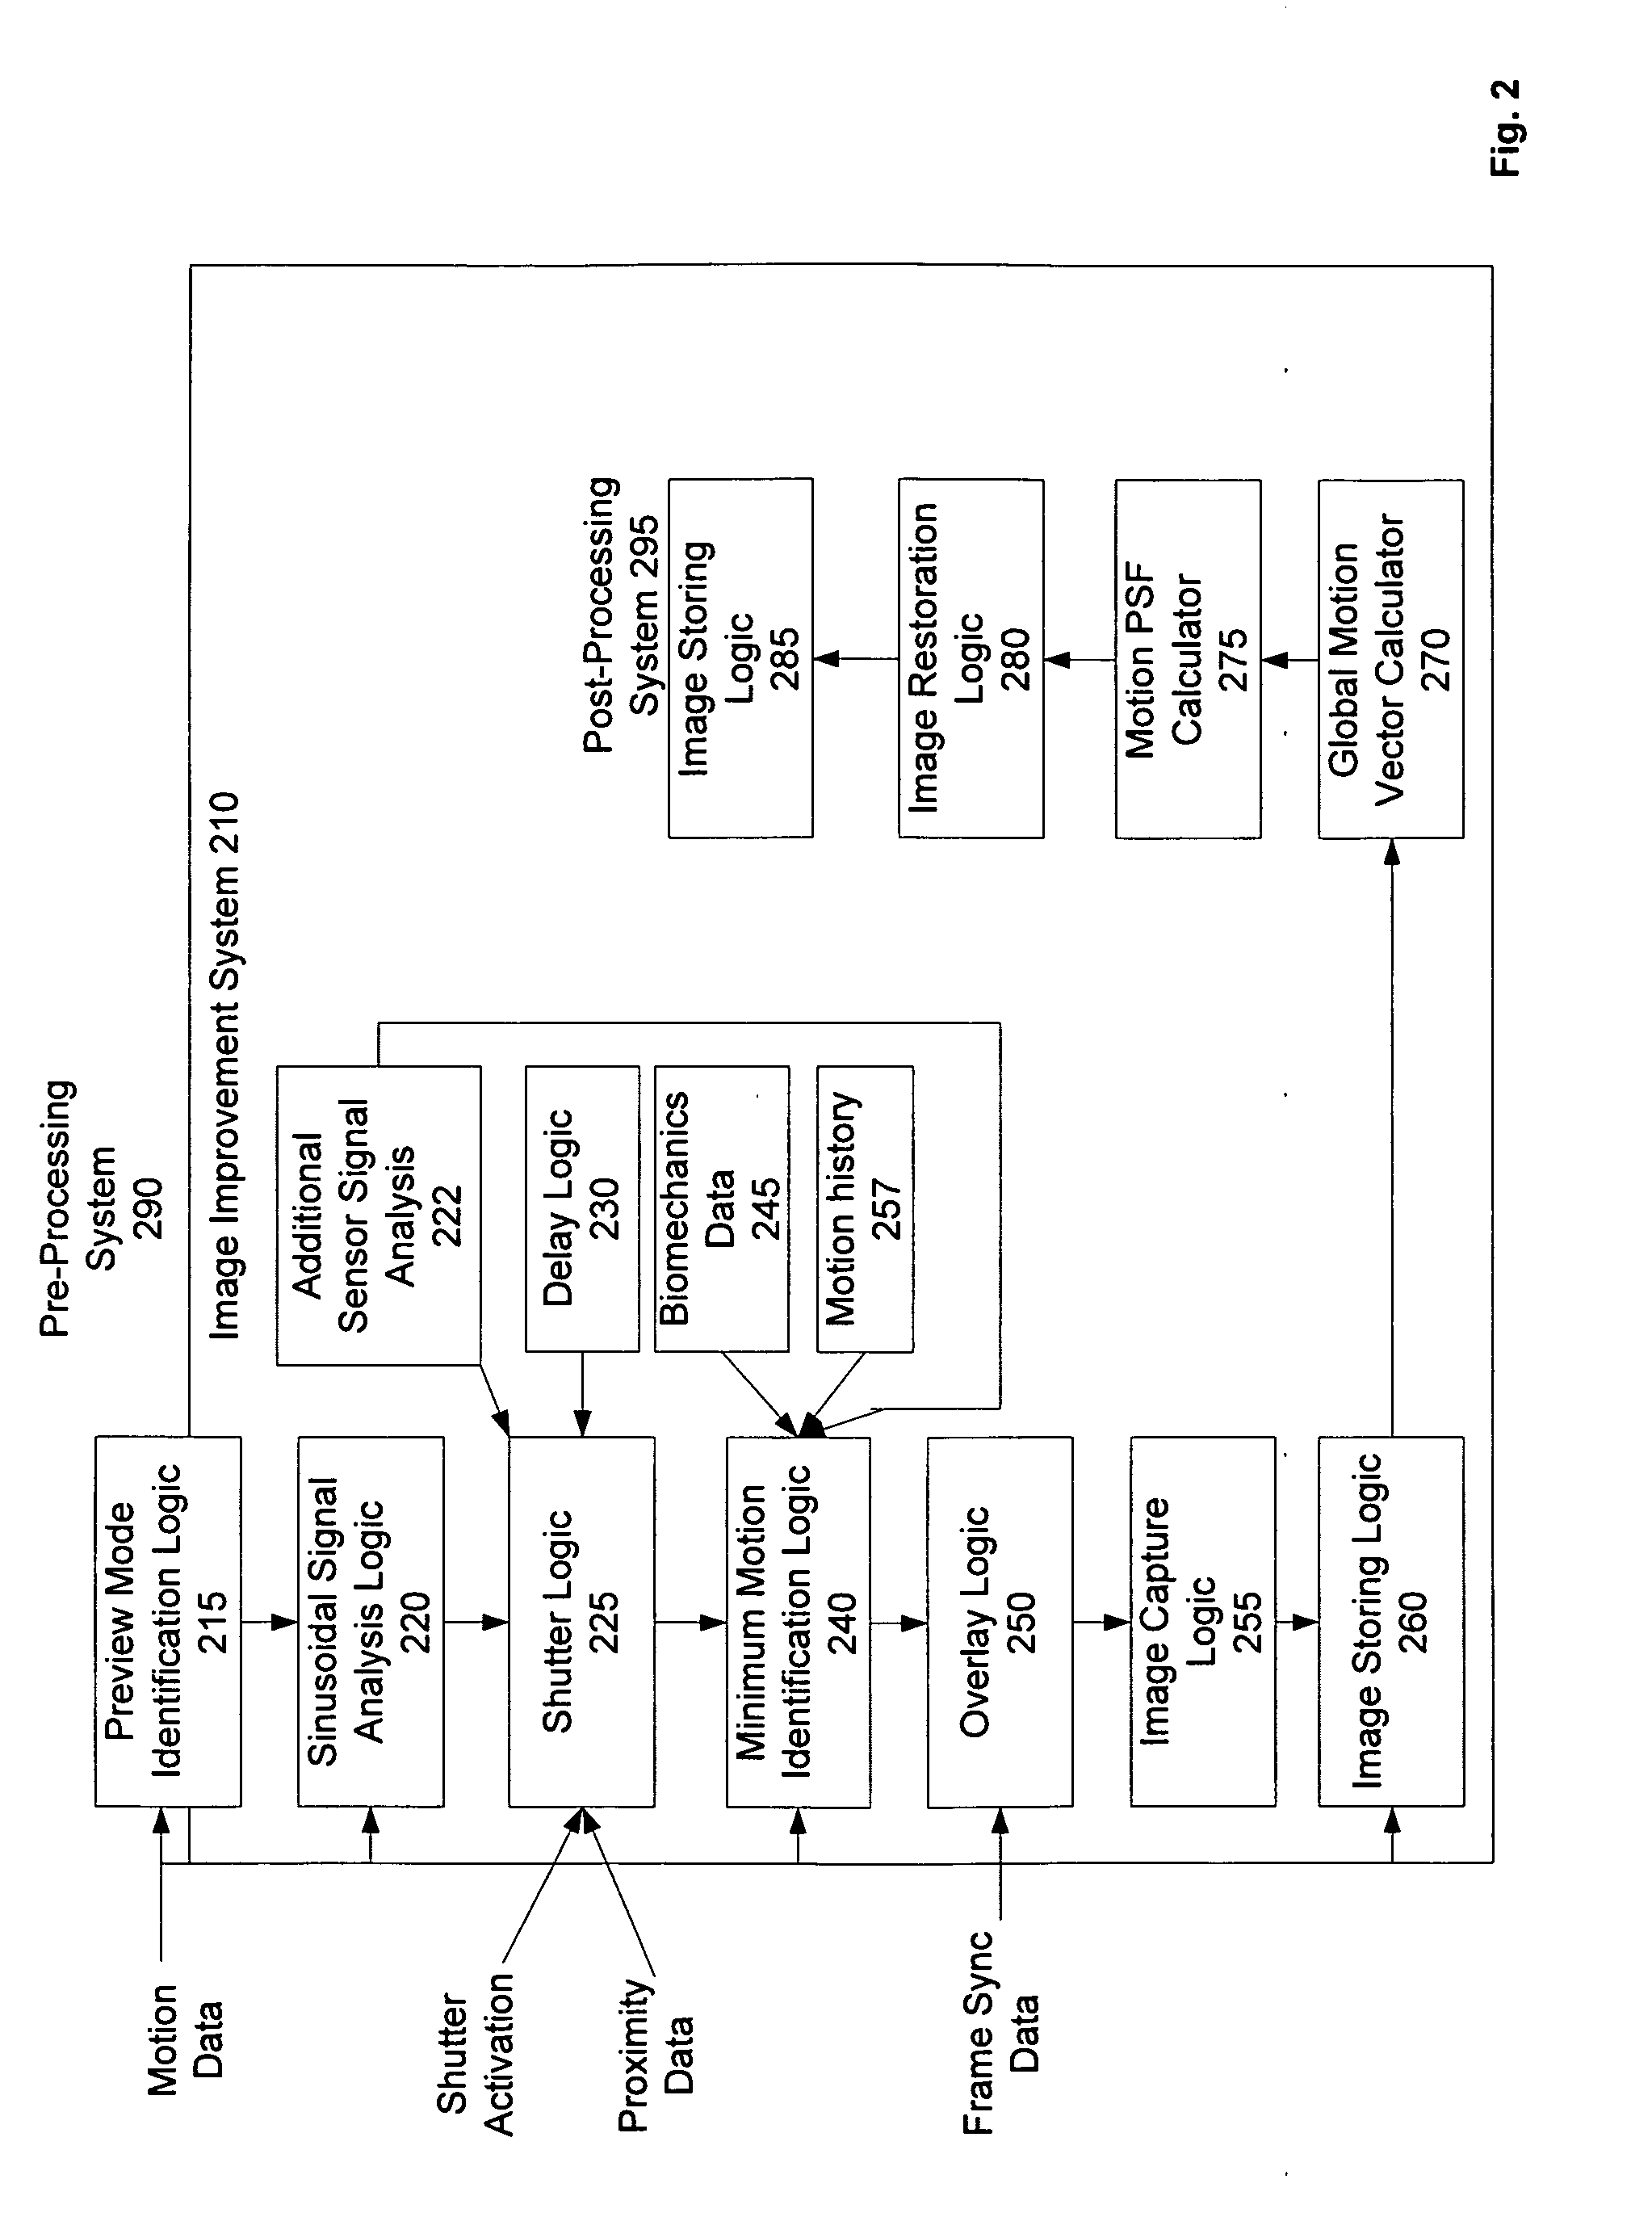 Method and Apparatus for Improving Photo Image Quality